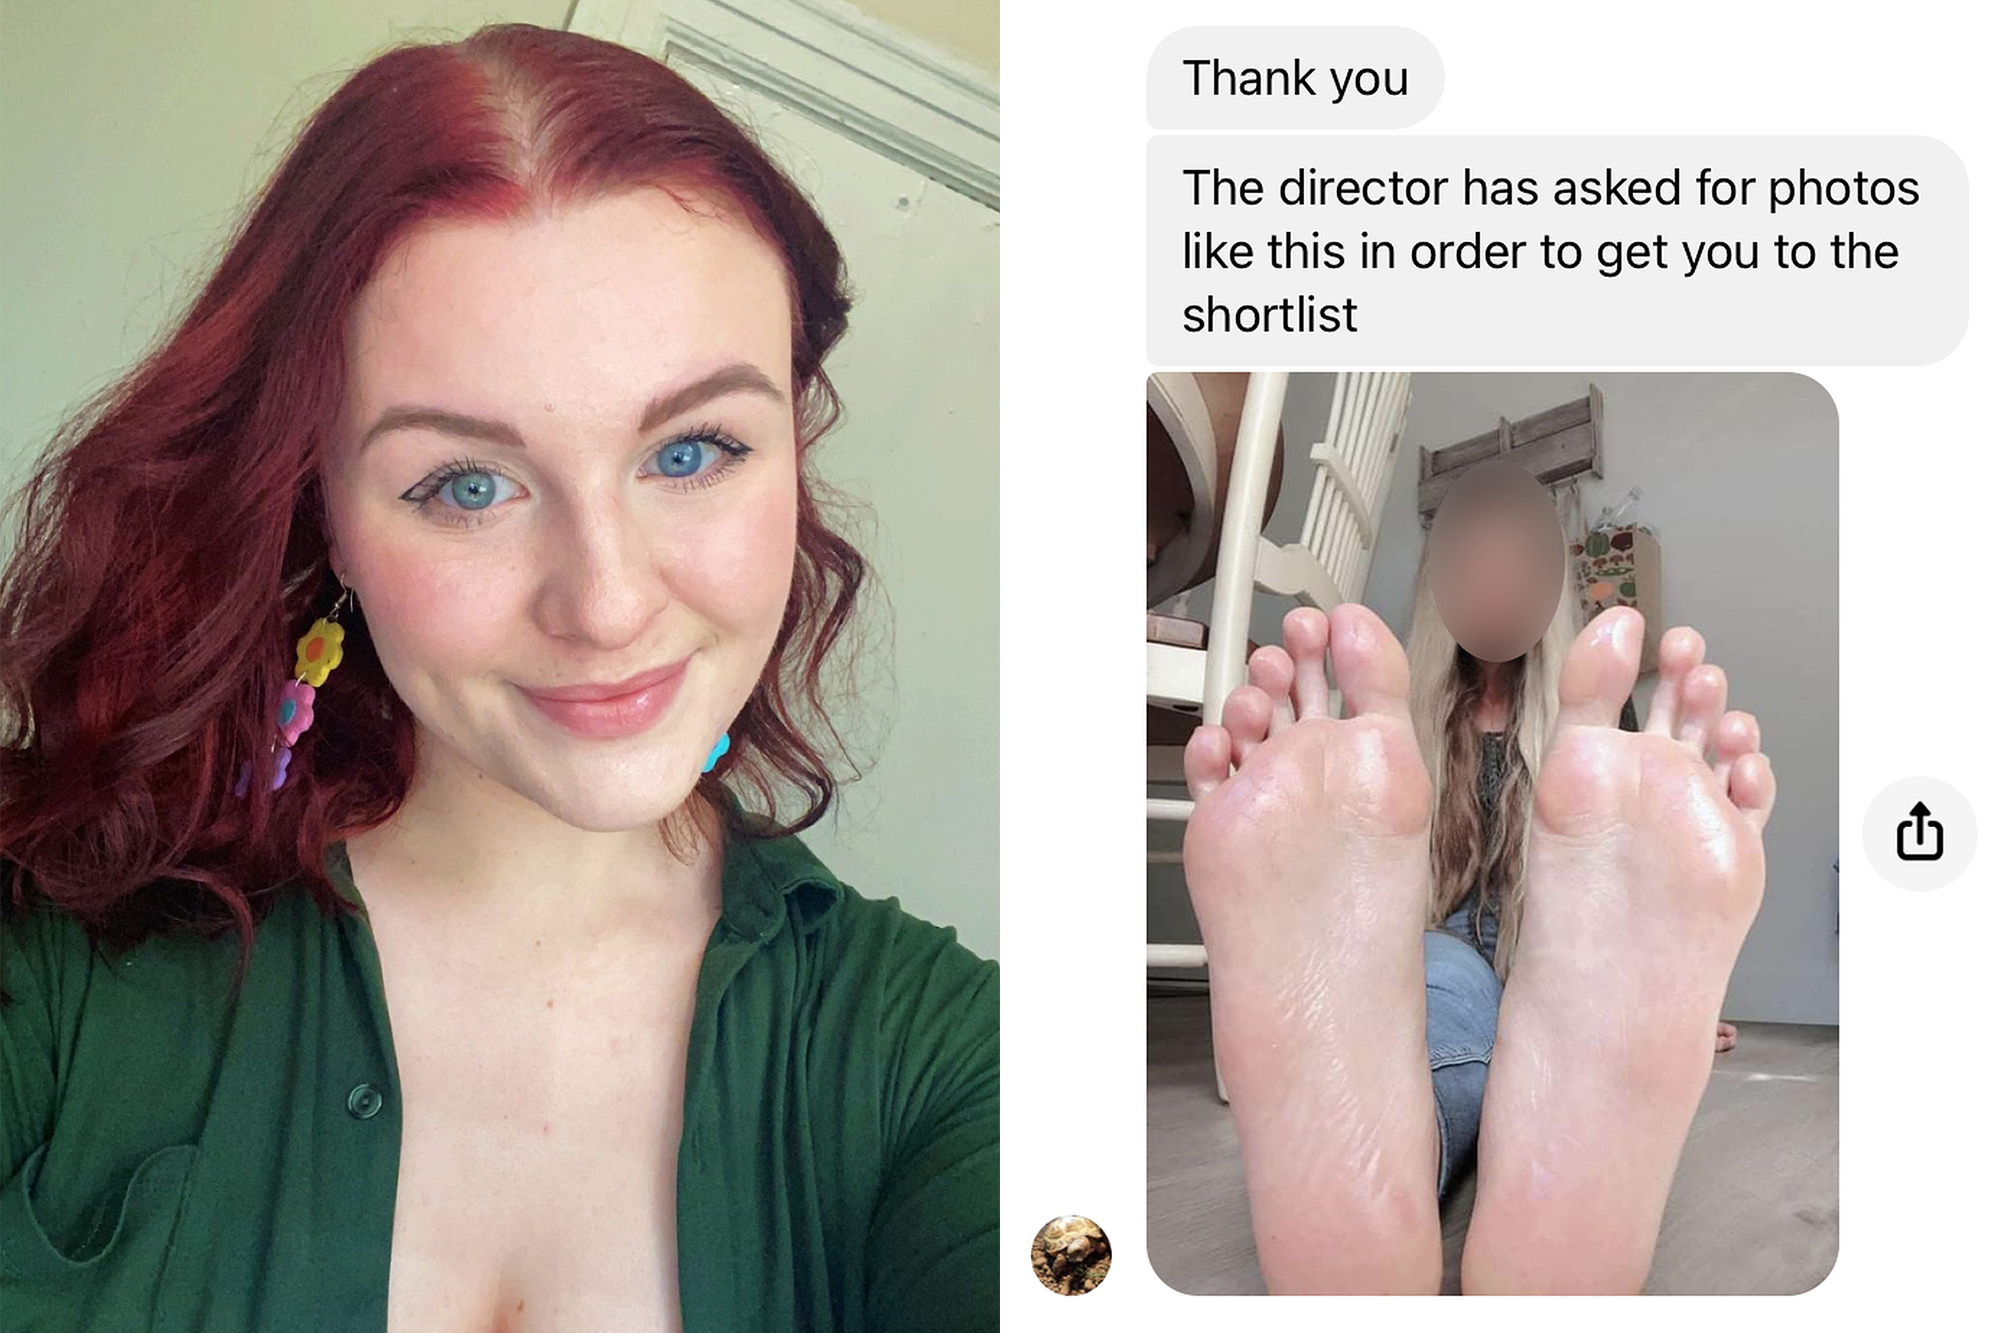 Actress exposes foot fetish ‘gallop’ after kinky ‘sham’ auditions